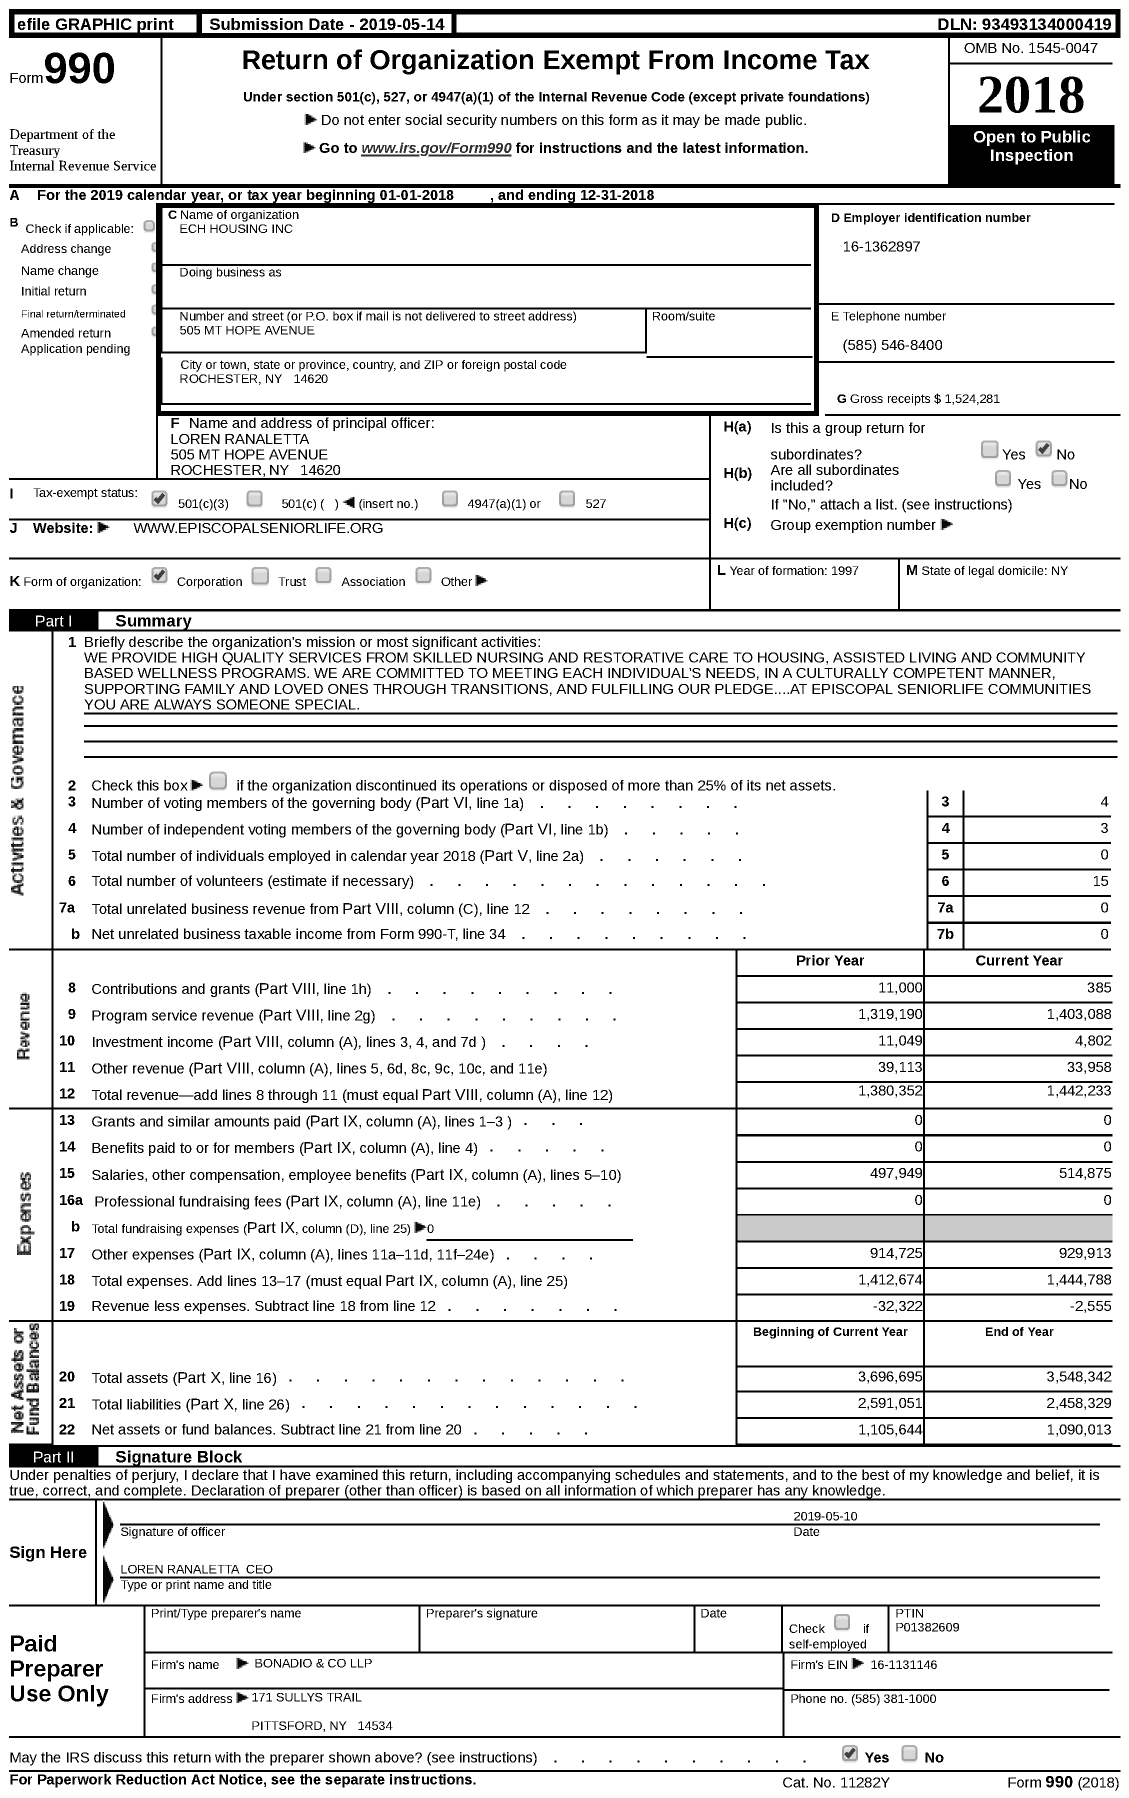 Image of first page of 2018 Form 990 for Ech Housing